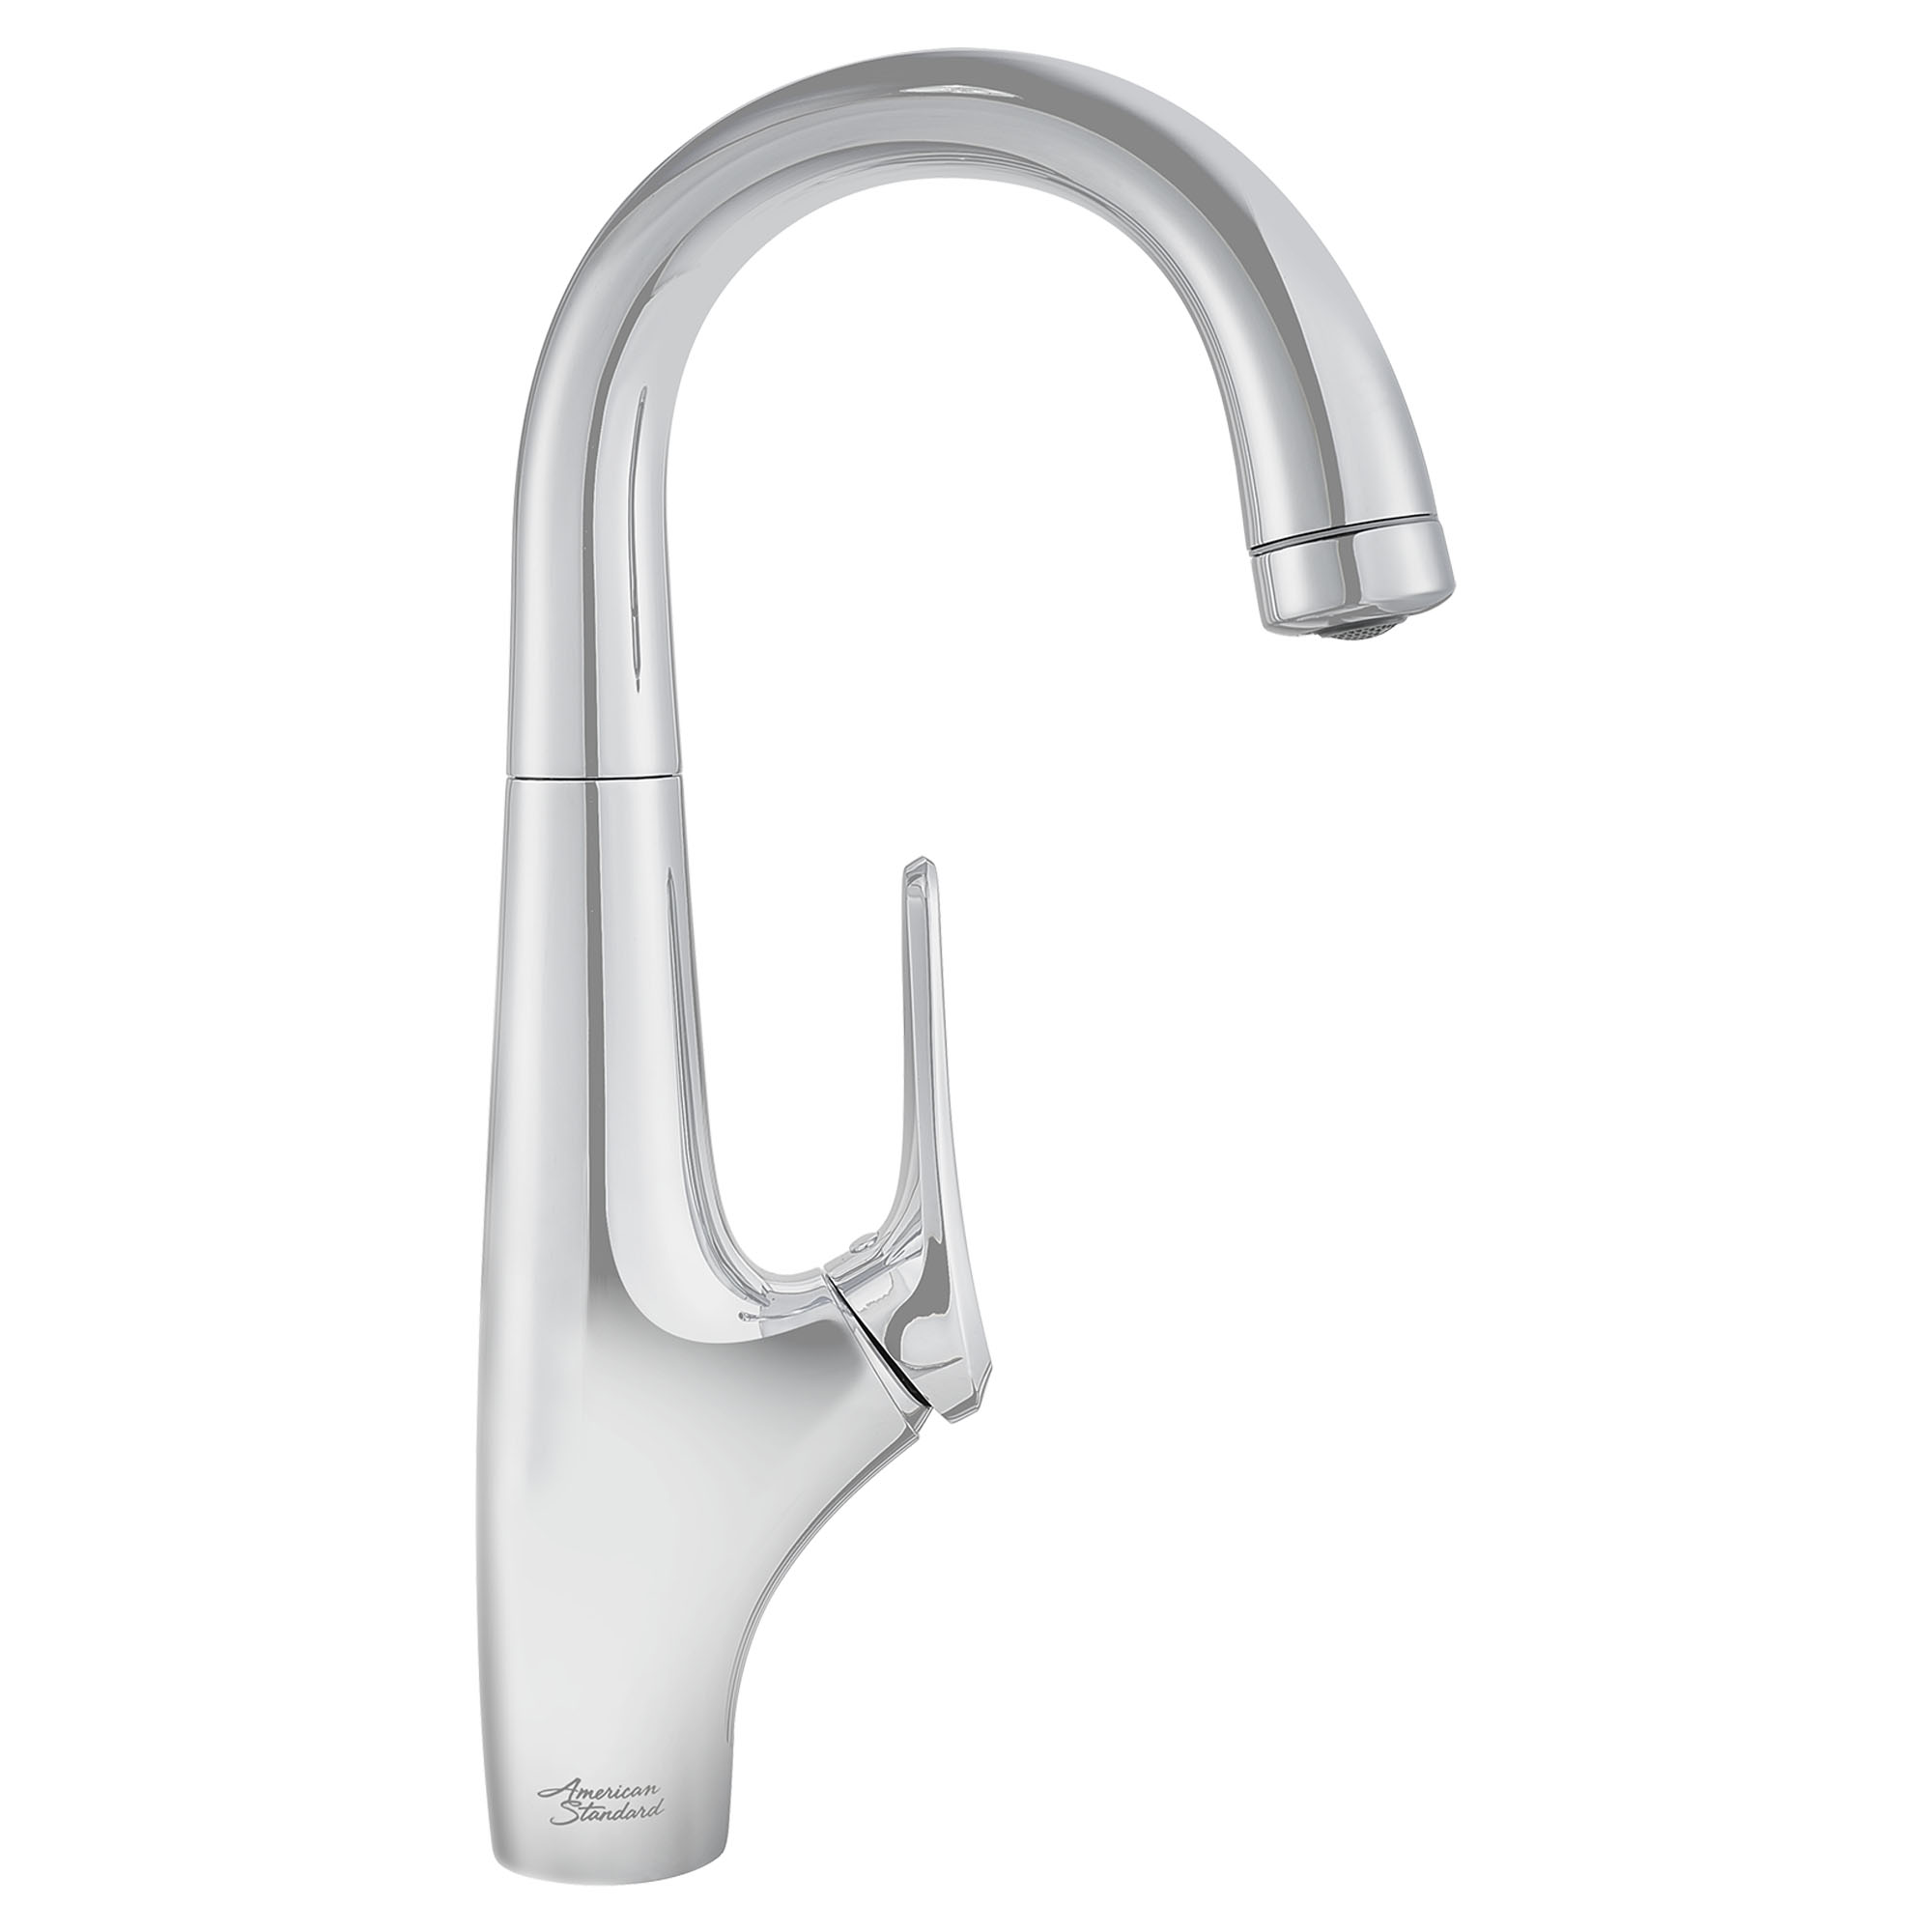 Avery® Single-Handle Pull-Down Single Spray Kitchen Faucet 1.5 gpm/5.7 L/min